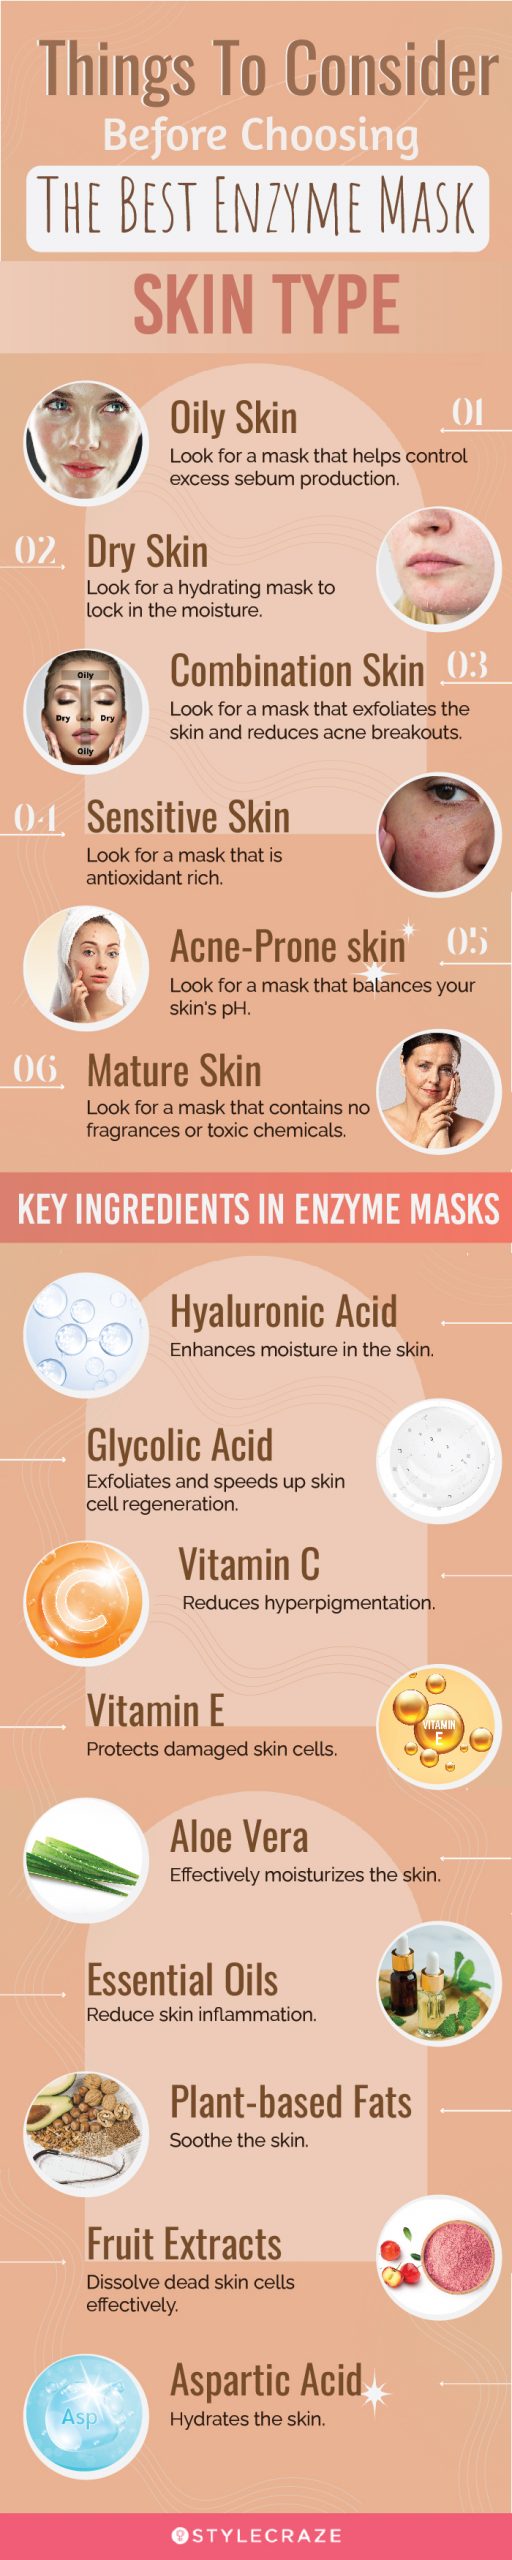 Things To Consider Before Choosing The Best Enzyme Mask [infographic]